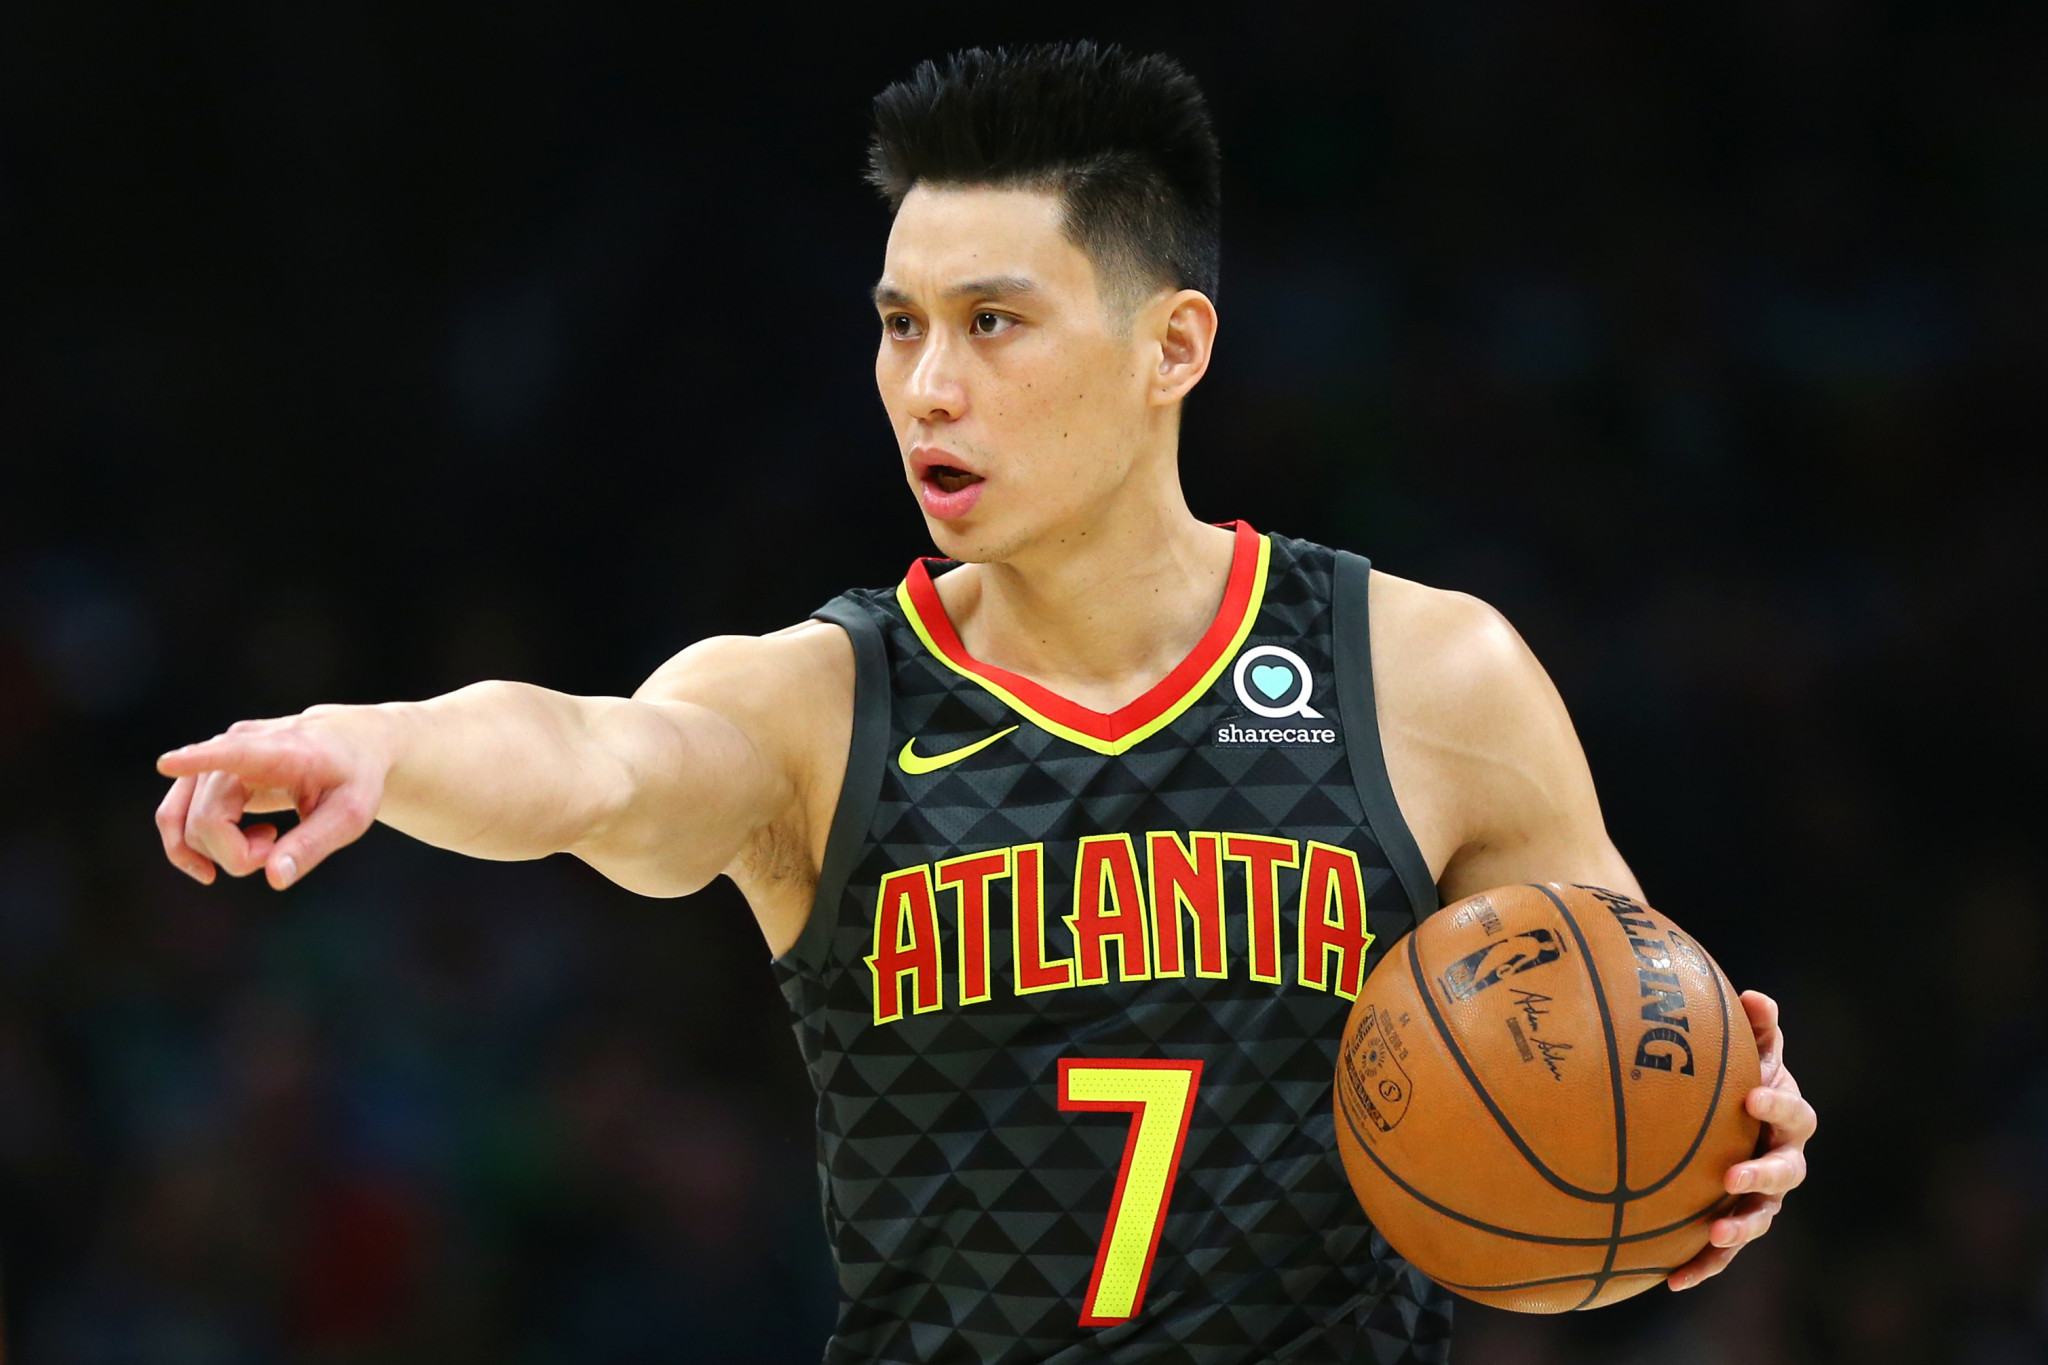 Basketball's Lin condemns COVID-19-related violence towards Asian people